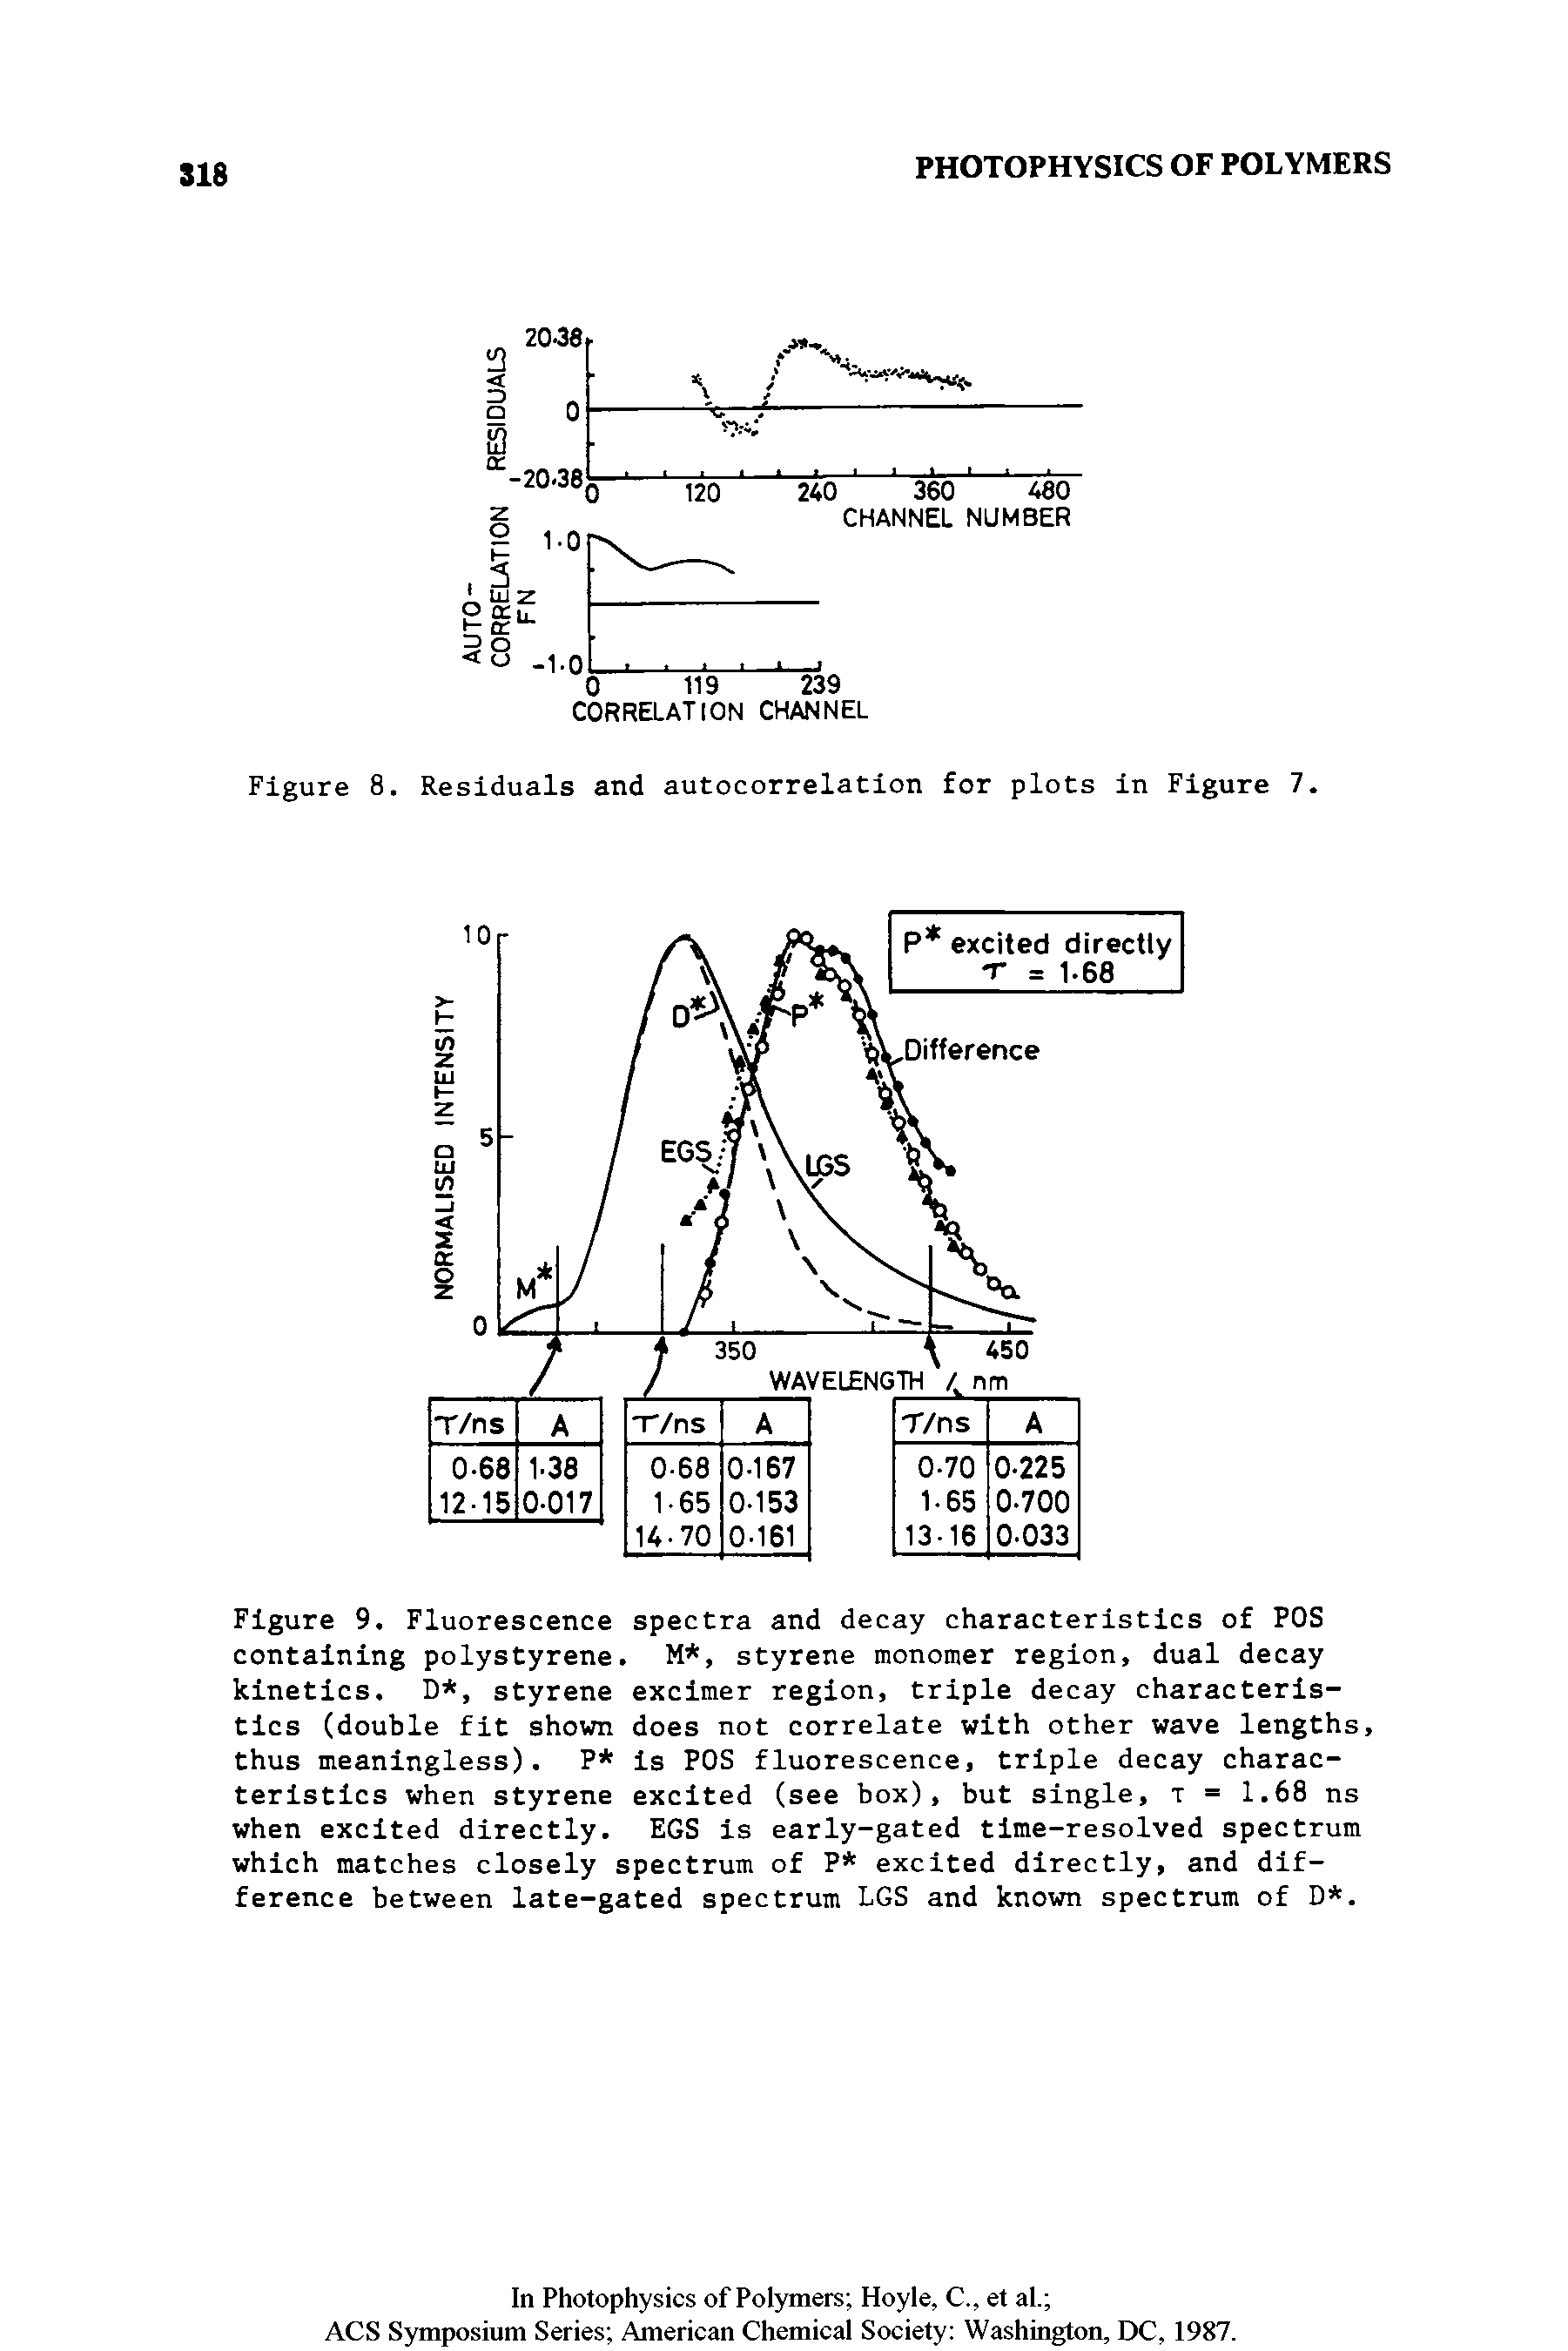 Figure 9. Fluorescence spectra and decay characteristics of POS containing polystyrene. M, styrene monomer region, dual decay kinetics. D, styrene excimer region, triple decay characteristics (double fit shovm does not correlate with other wave lengths, thus meaningless). P is POS fluorescence, triple decay characteristics when styrene excited (see box), but single, t = 1.68 ns when excited directly. EGS is early-gated time-resolved spectrum which matches closely spectrum of P excited directly, and difference between late-gated spectrum LGS and known spectrum of D. ...